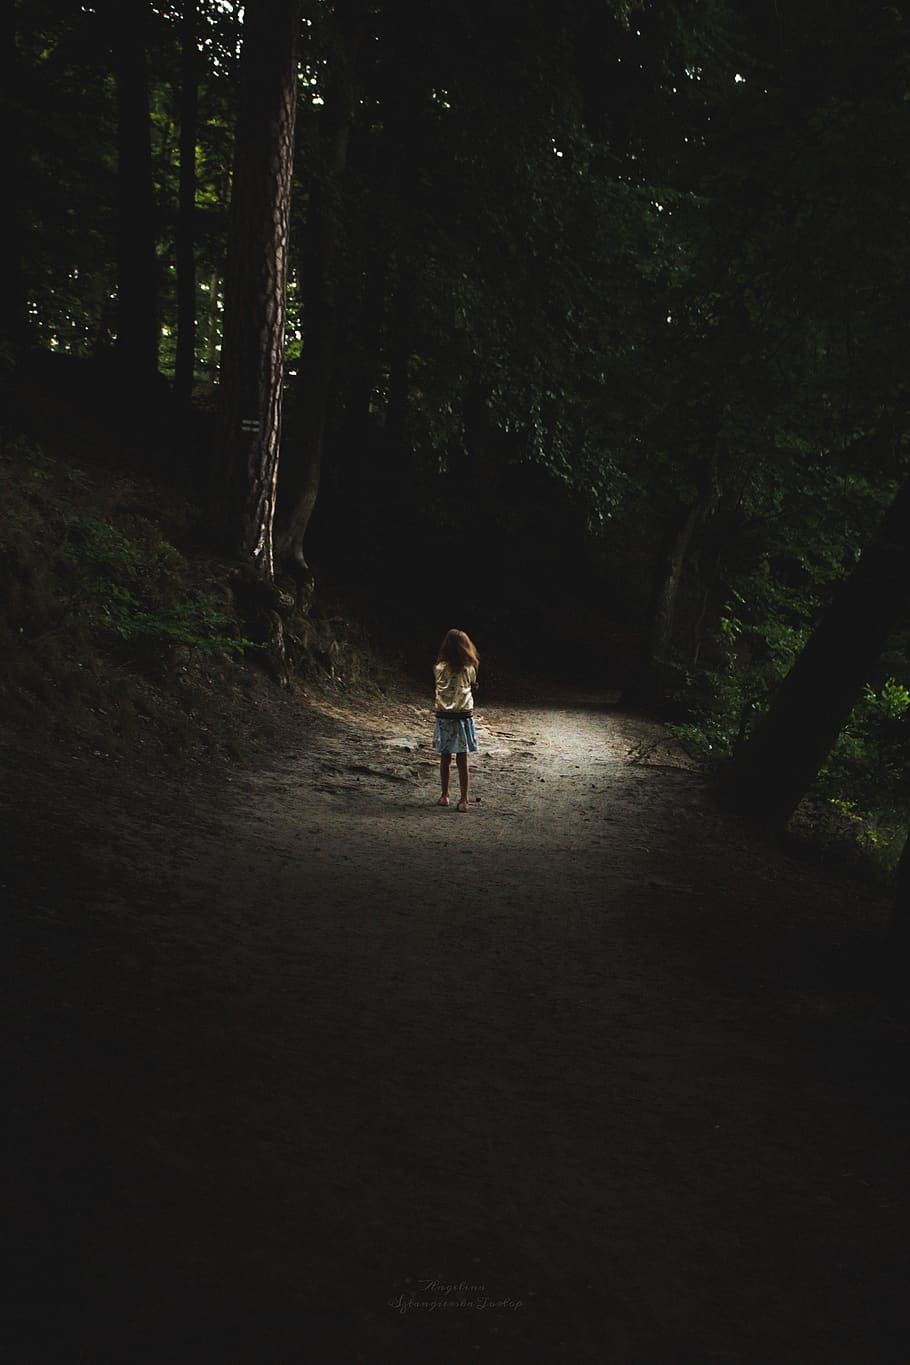 HD wallpaper: forest, child, alone, dark, gloomy, scary, path, loneliness